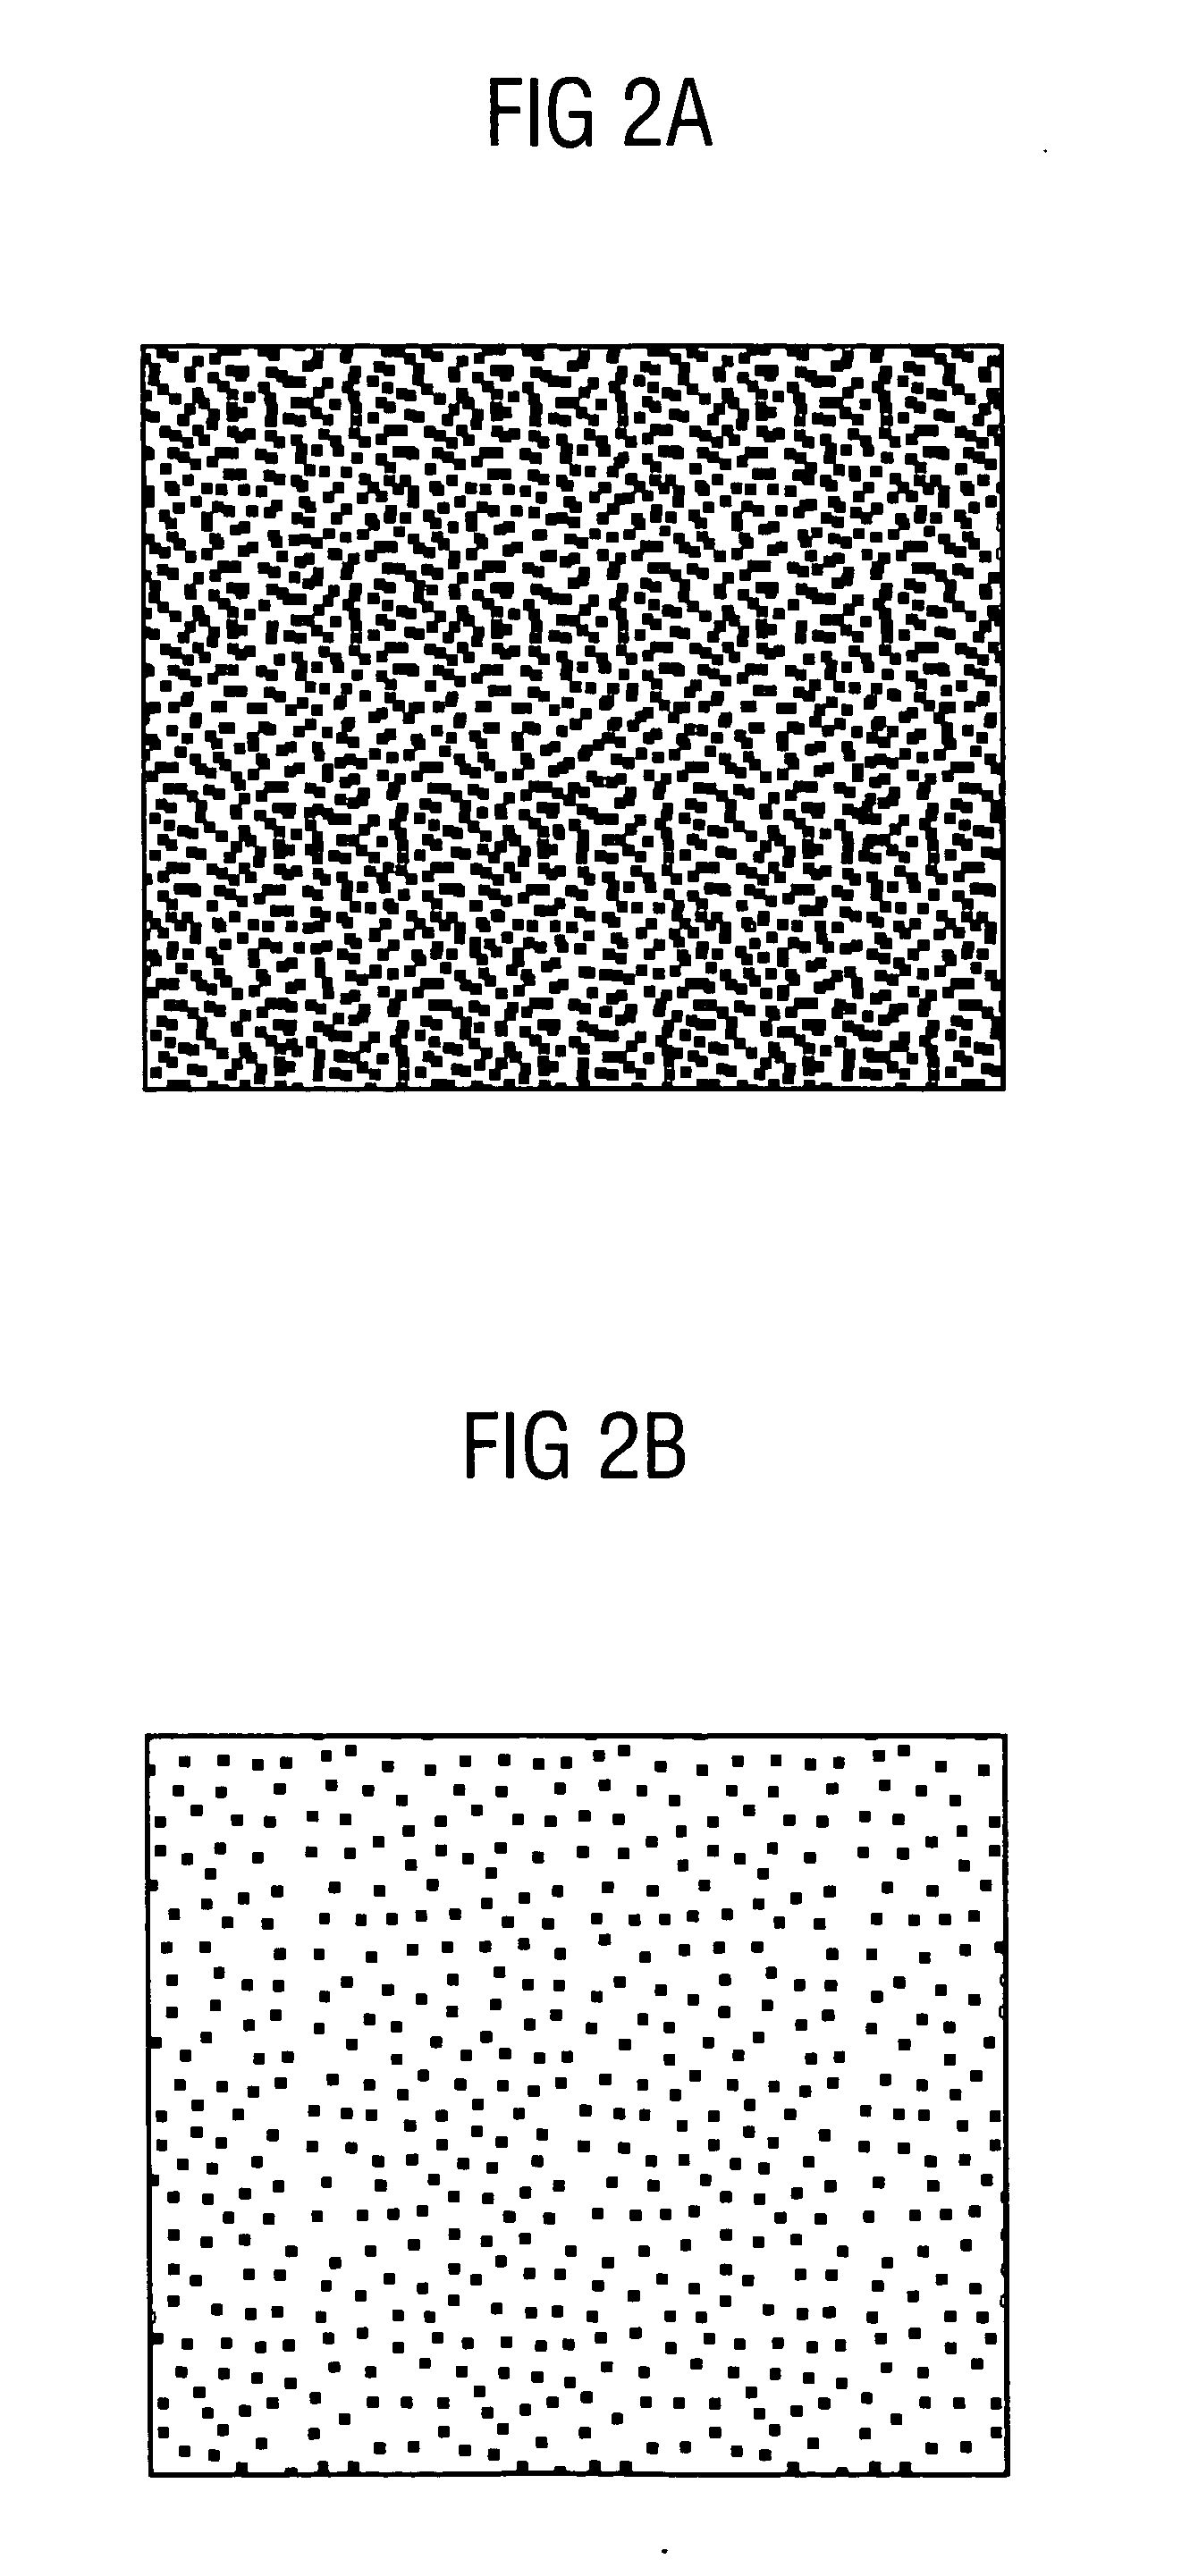 Non-volatile, resistive memory cell based on metal oxide nanoparticles, process for manufacturing the same and memory cell arrangement of the same